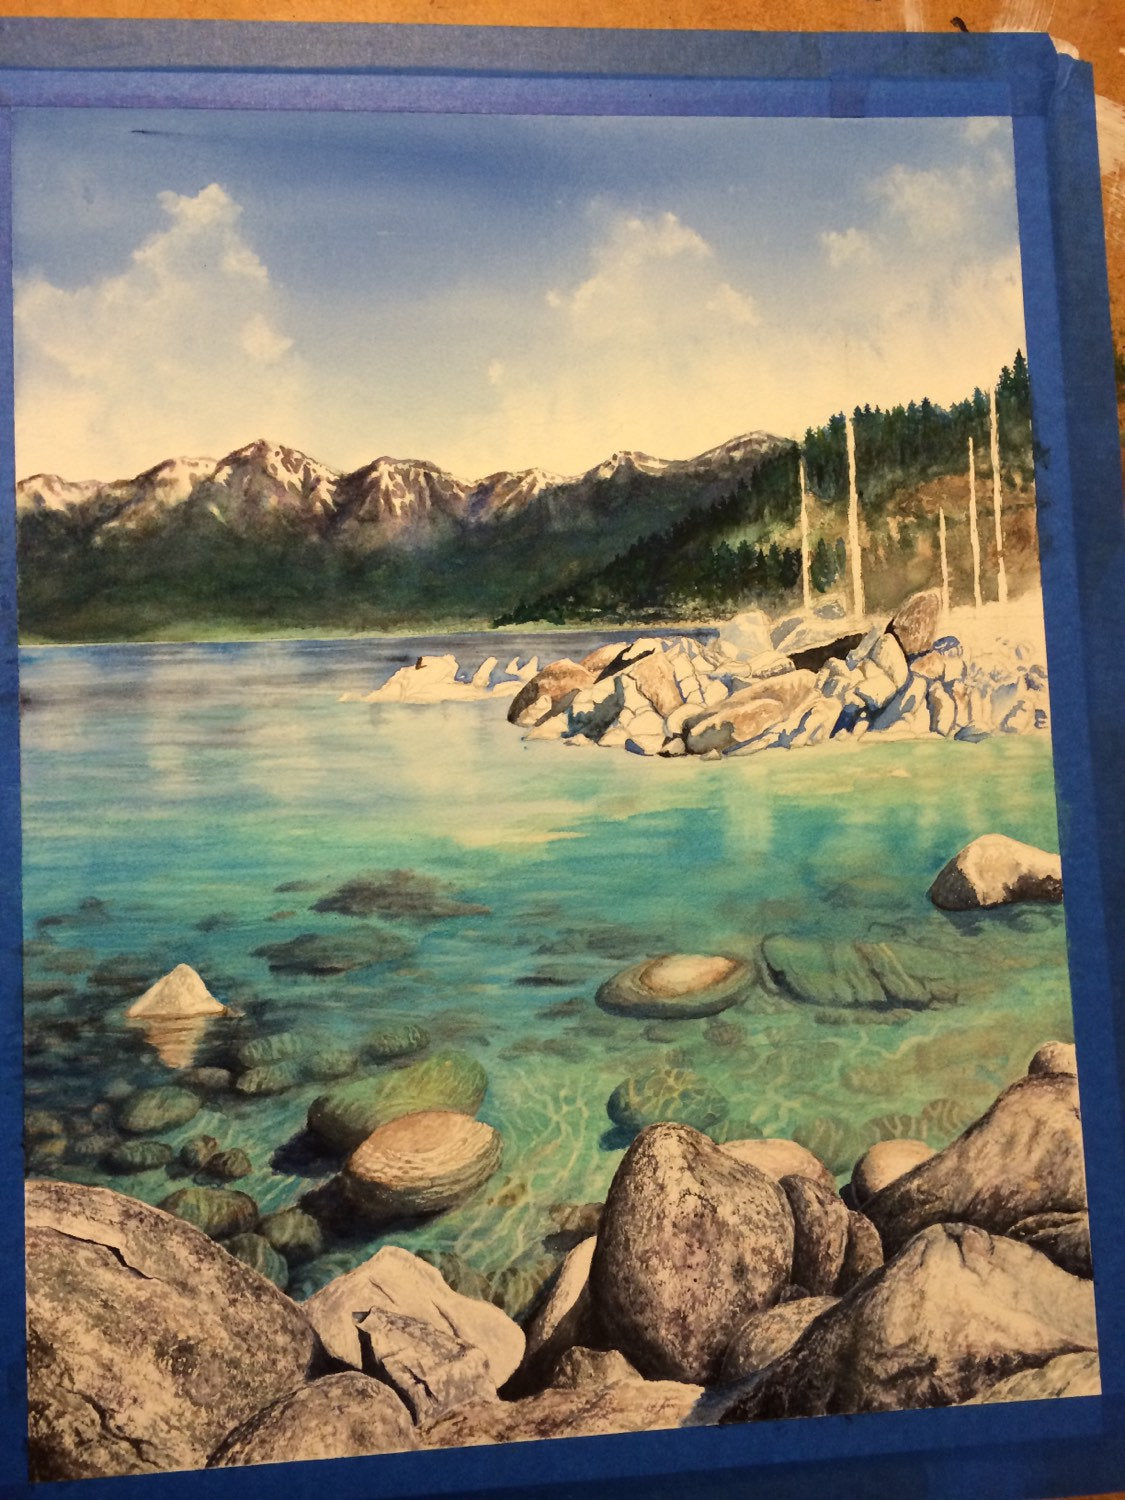 Original Watercolor Painting Lake Tahoe Sand Harbor Art turquoise water Mountain Nature Framed Art by Artist Christie Marie Elder-Russell ©